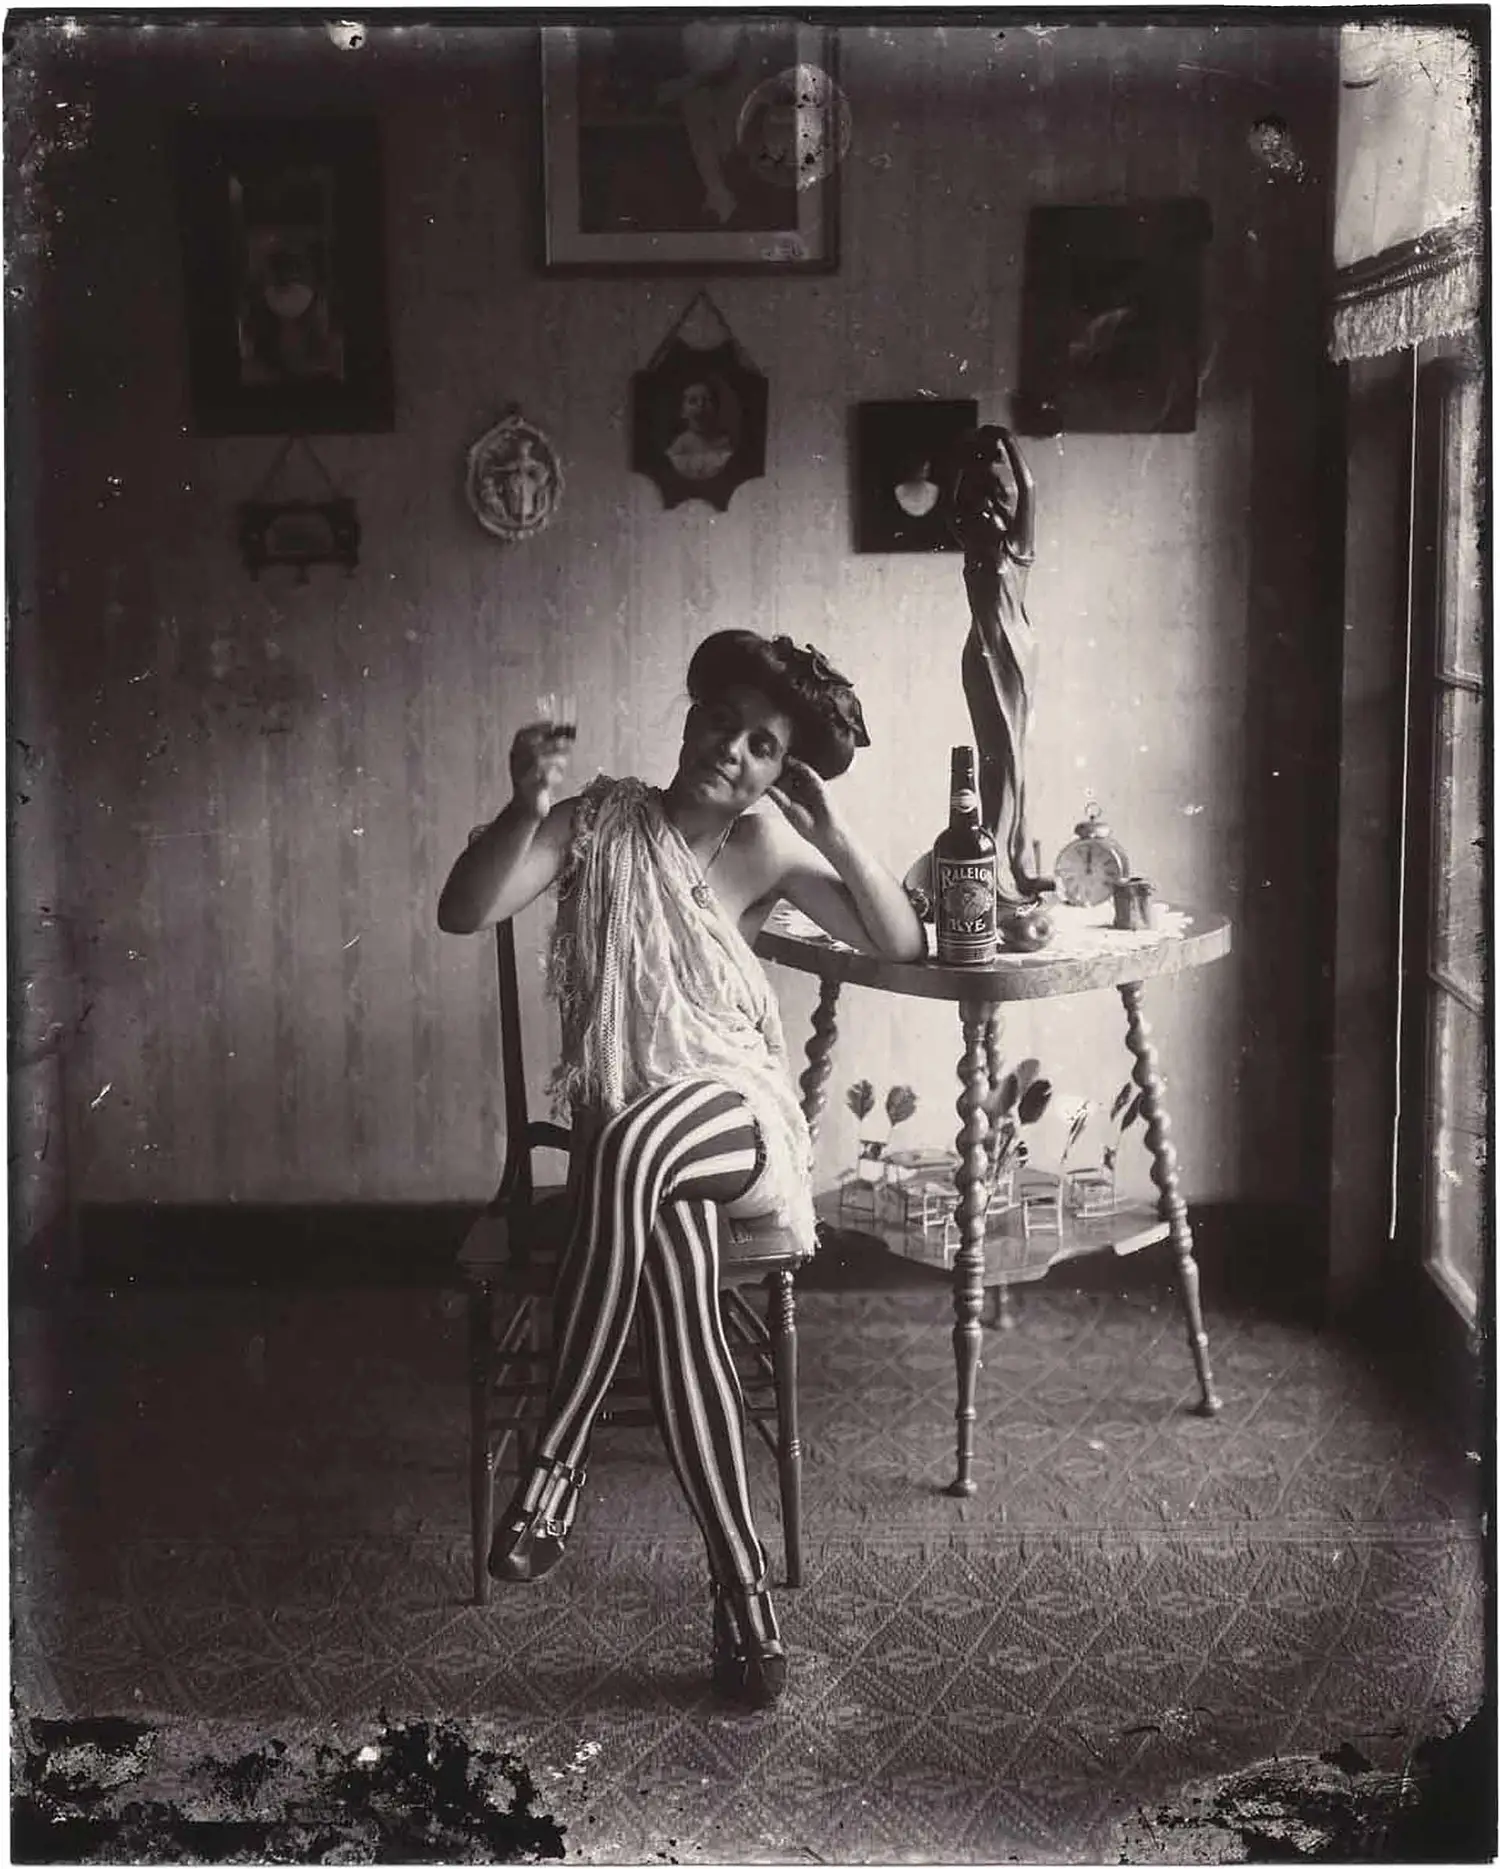 In this vintage photograph a woman is seated on a carved wooden chair. Her legs are crossed and she leans on a table next to her, upon which a bottle of rye is prominently placed. She is holding a partially filled glass with her right arm and is wearing black and white striped leggings and a dress that reveals her arms and left shoulder.